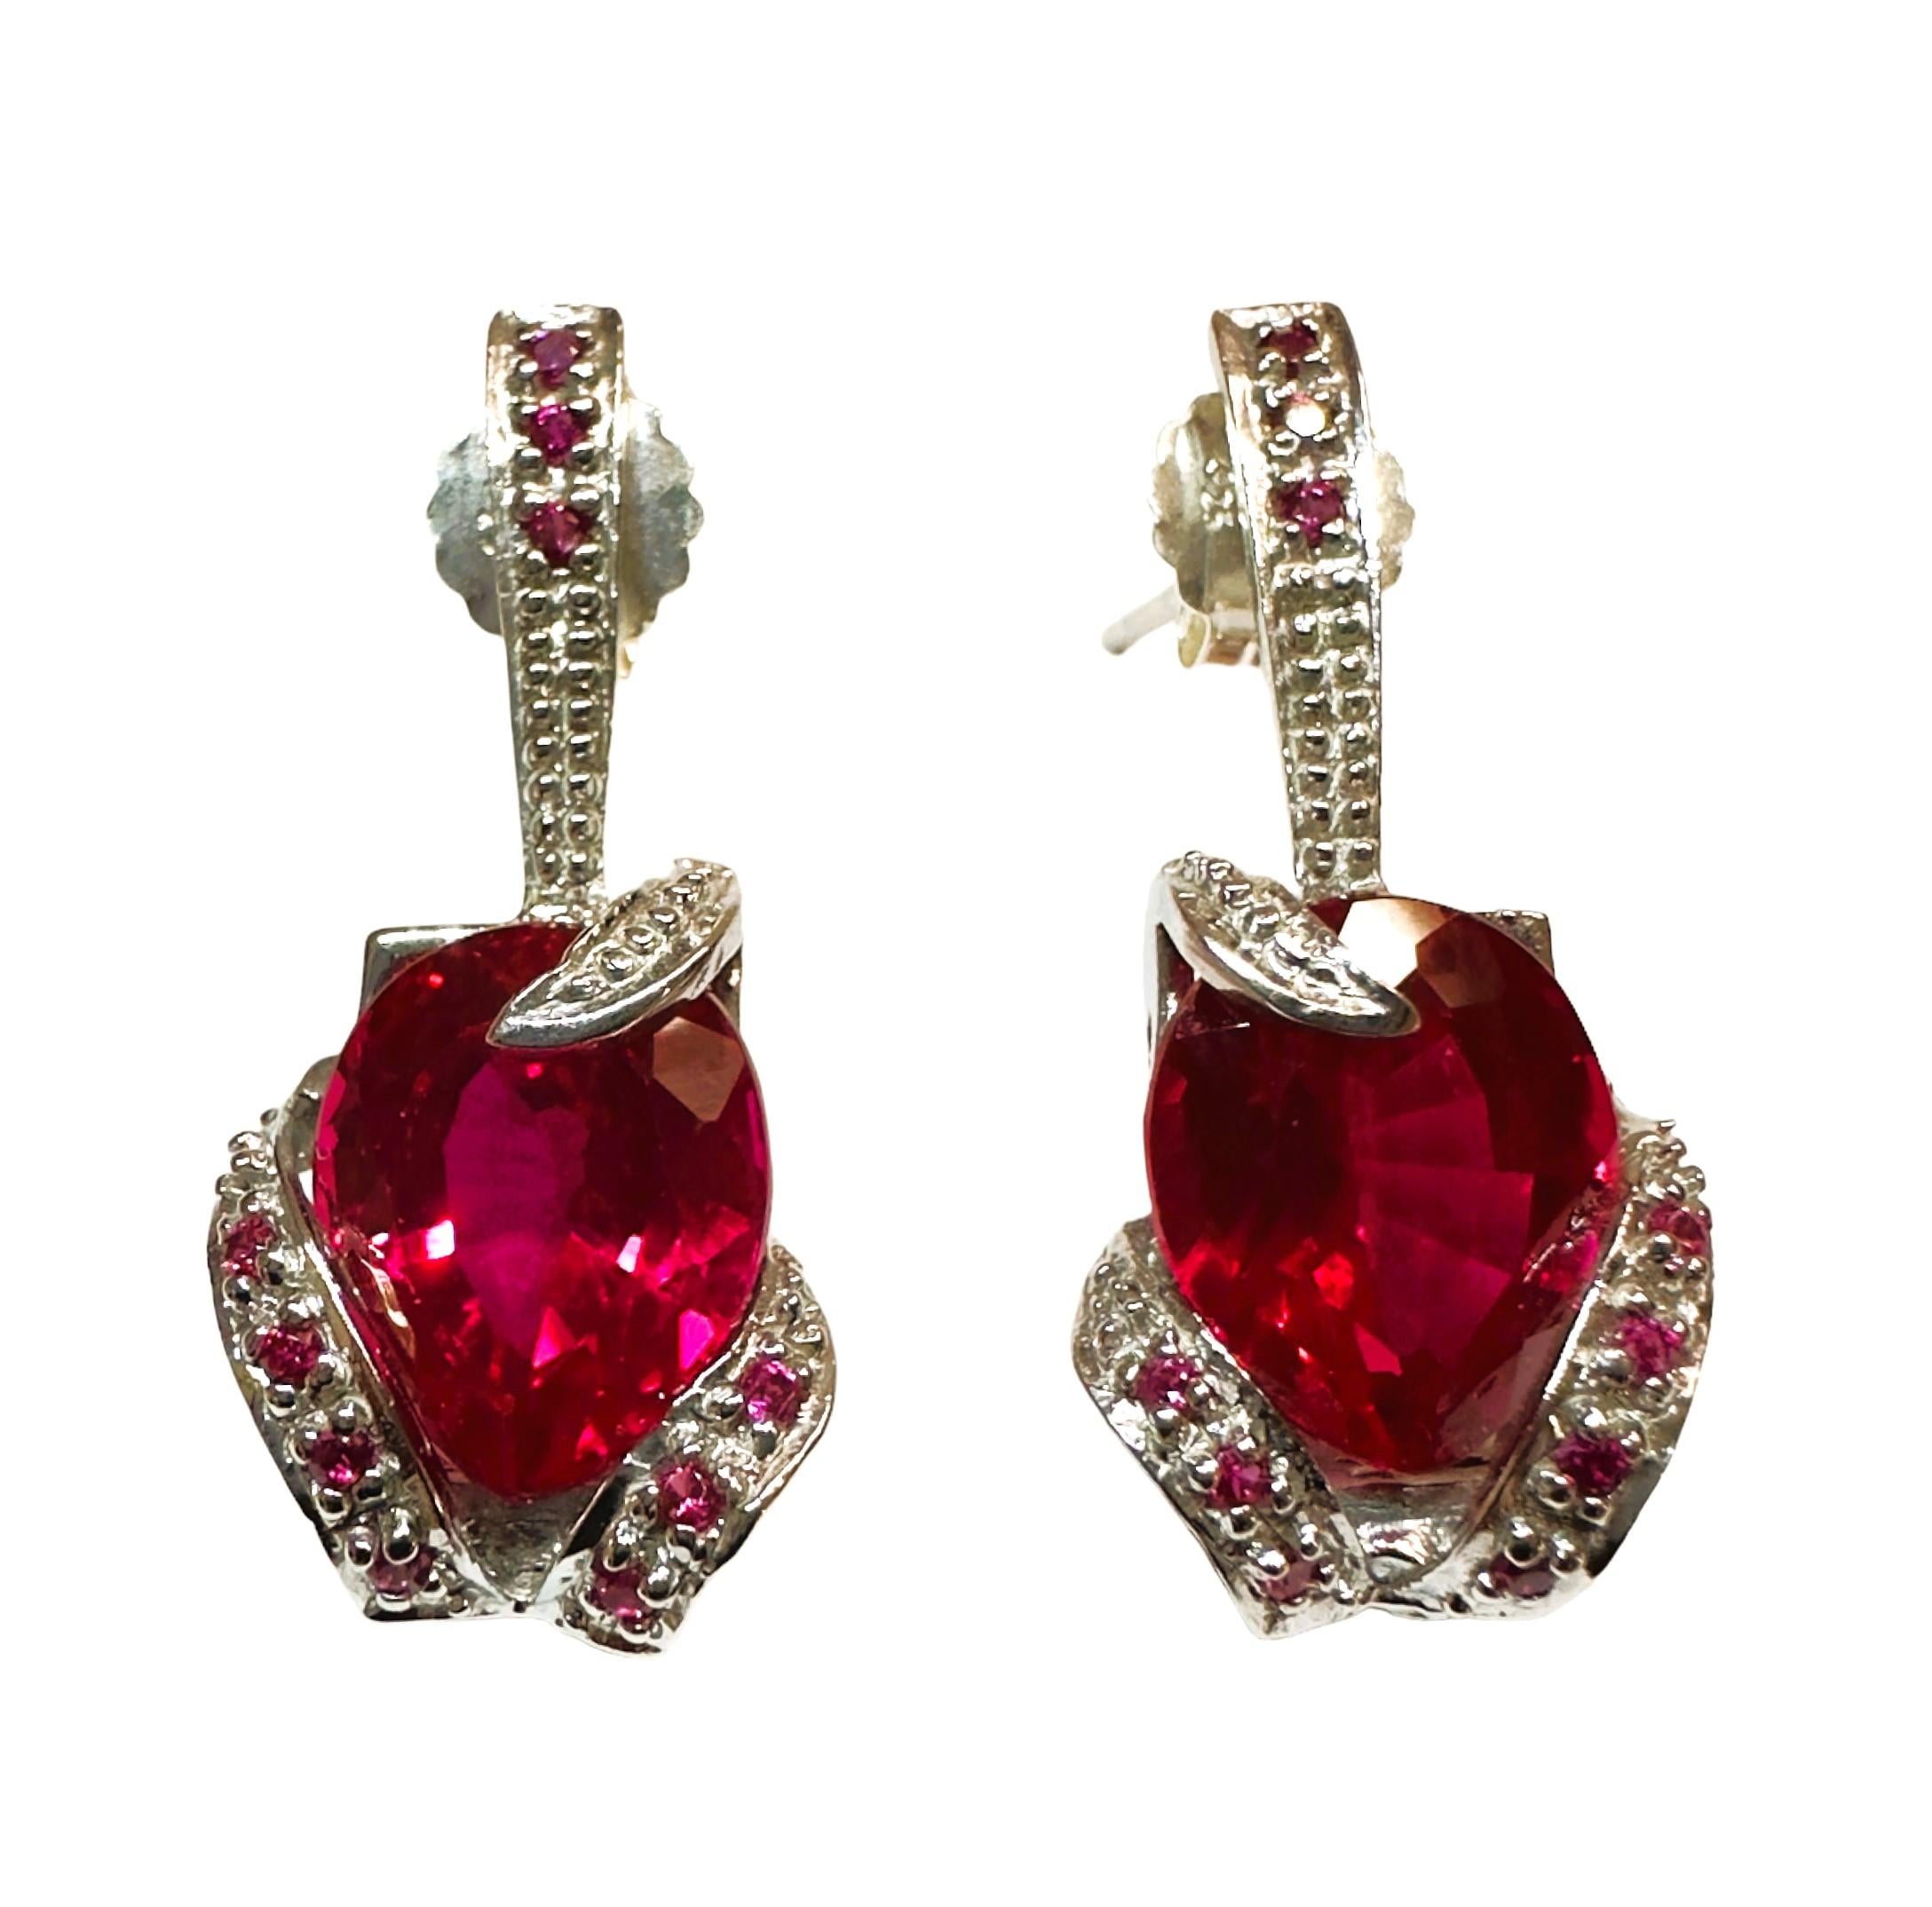 Women's New African 9.70 Ct Pinkish Red Sapphire Sterling Earrings